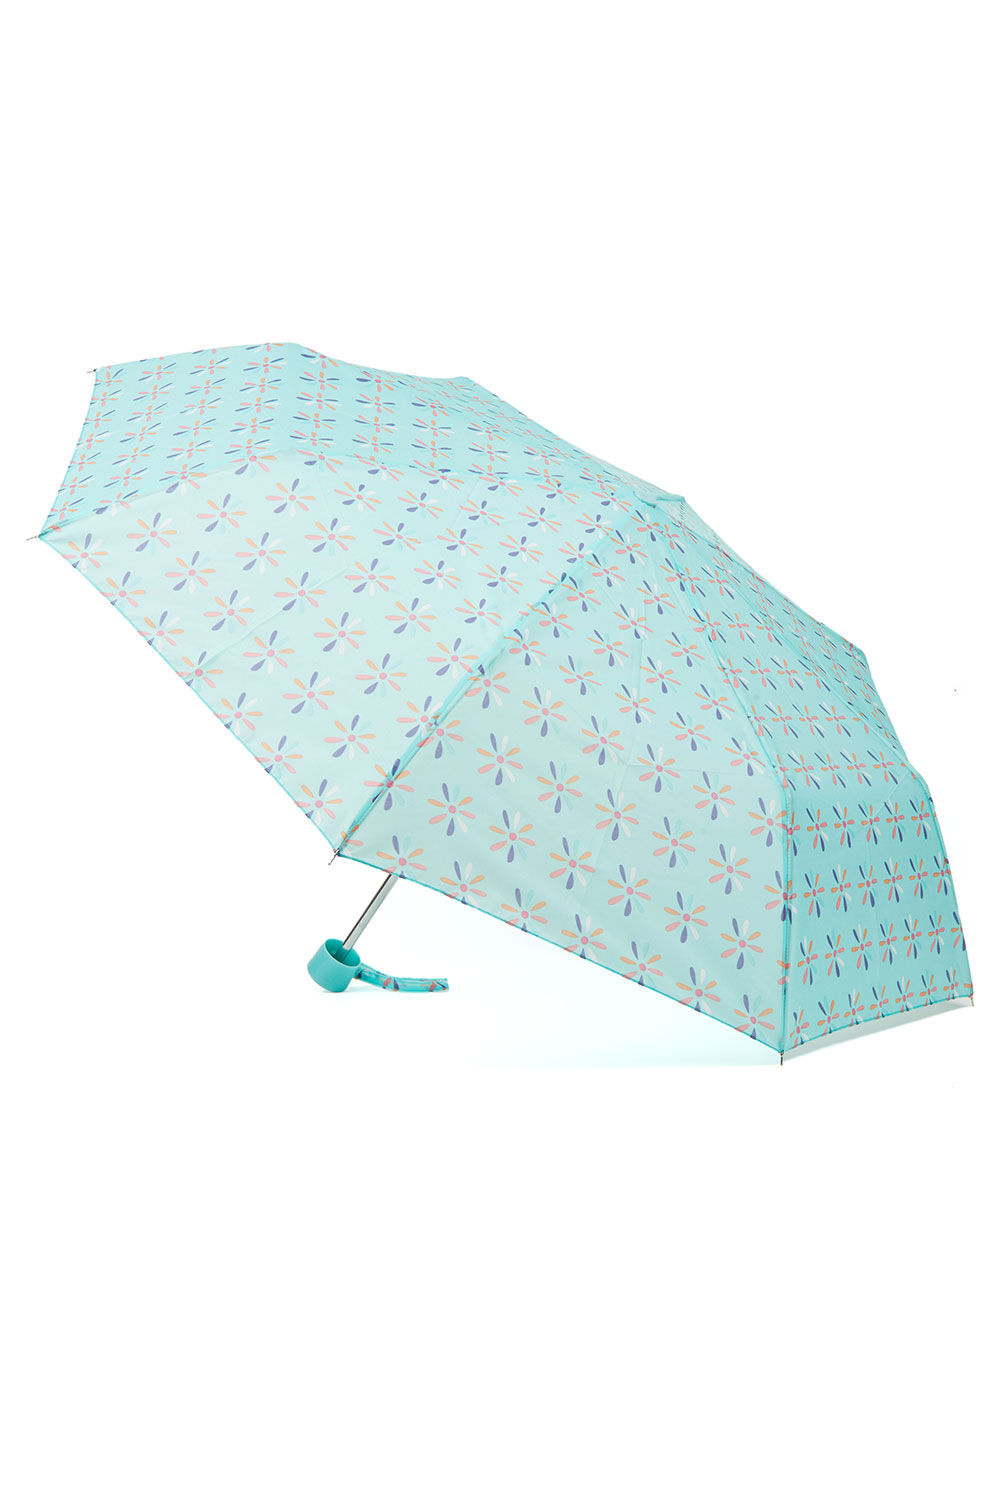 Bonmarche Teal Flower Print Compact Umbrella, Size: One Size